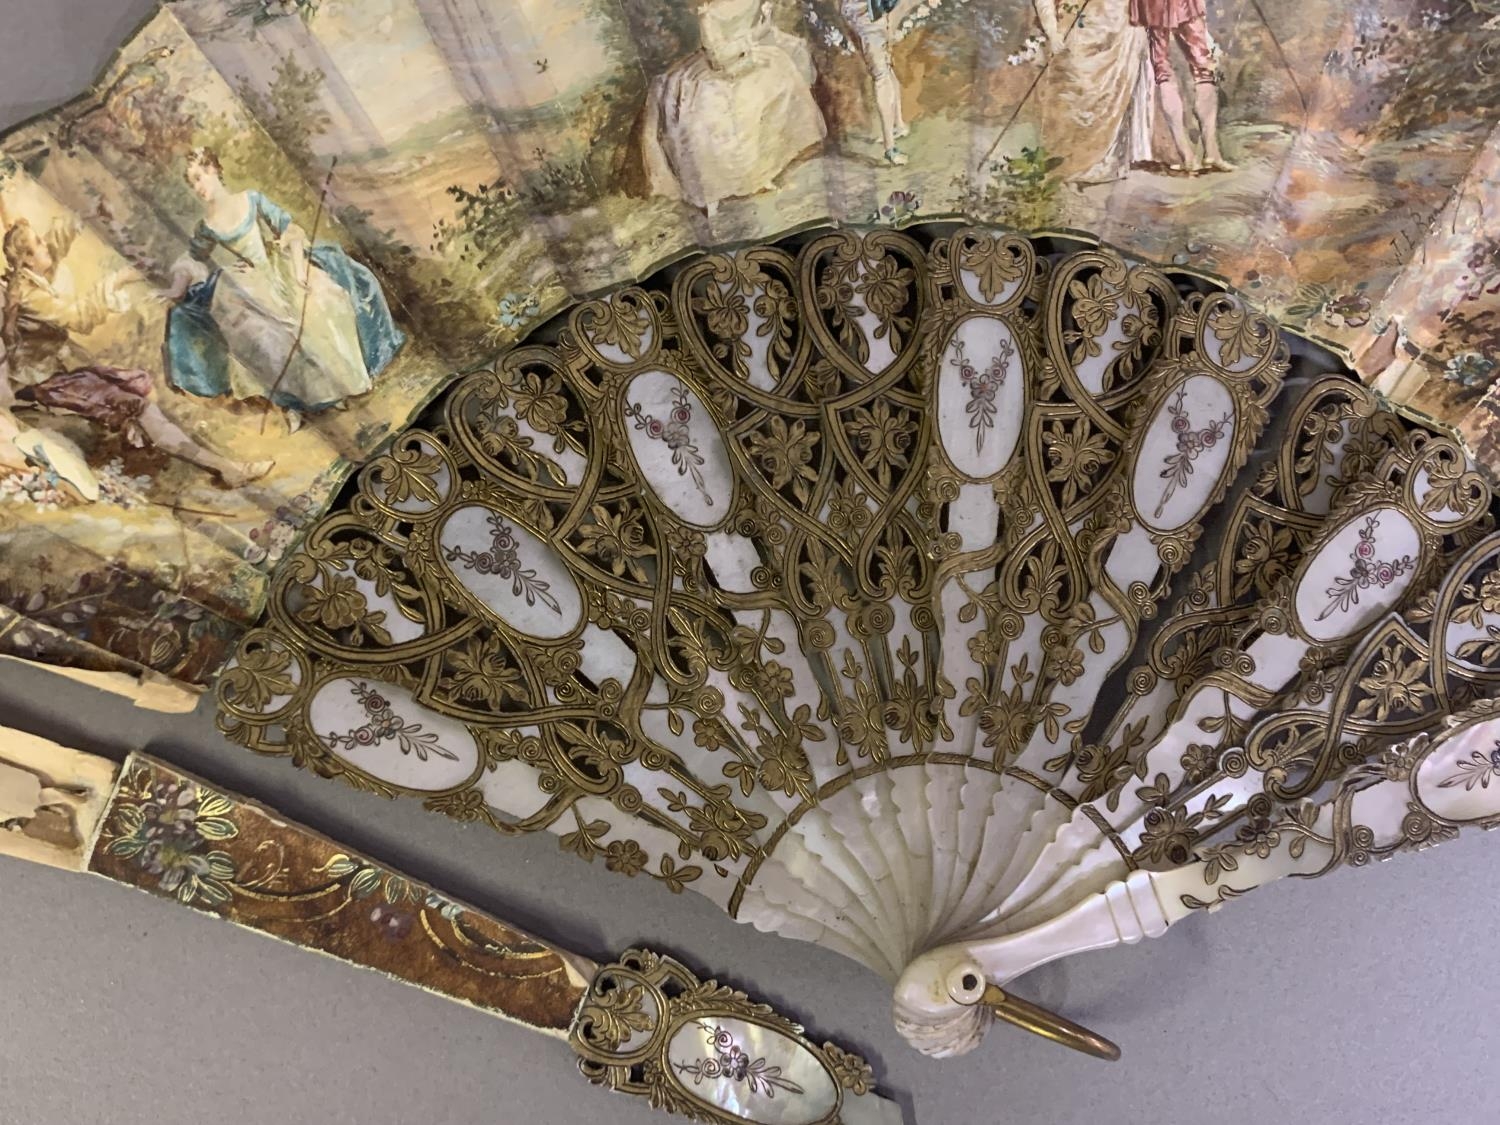 Three 20th century fans: the first, in white mother of pearl, a pastiche of an 18th century fan, the - Image 8 of 9